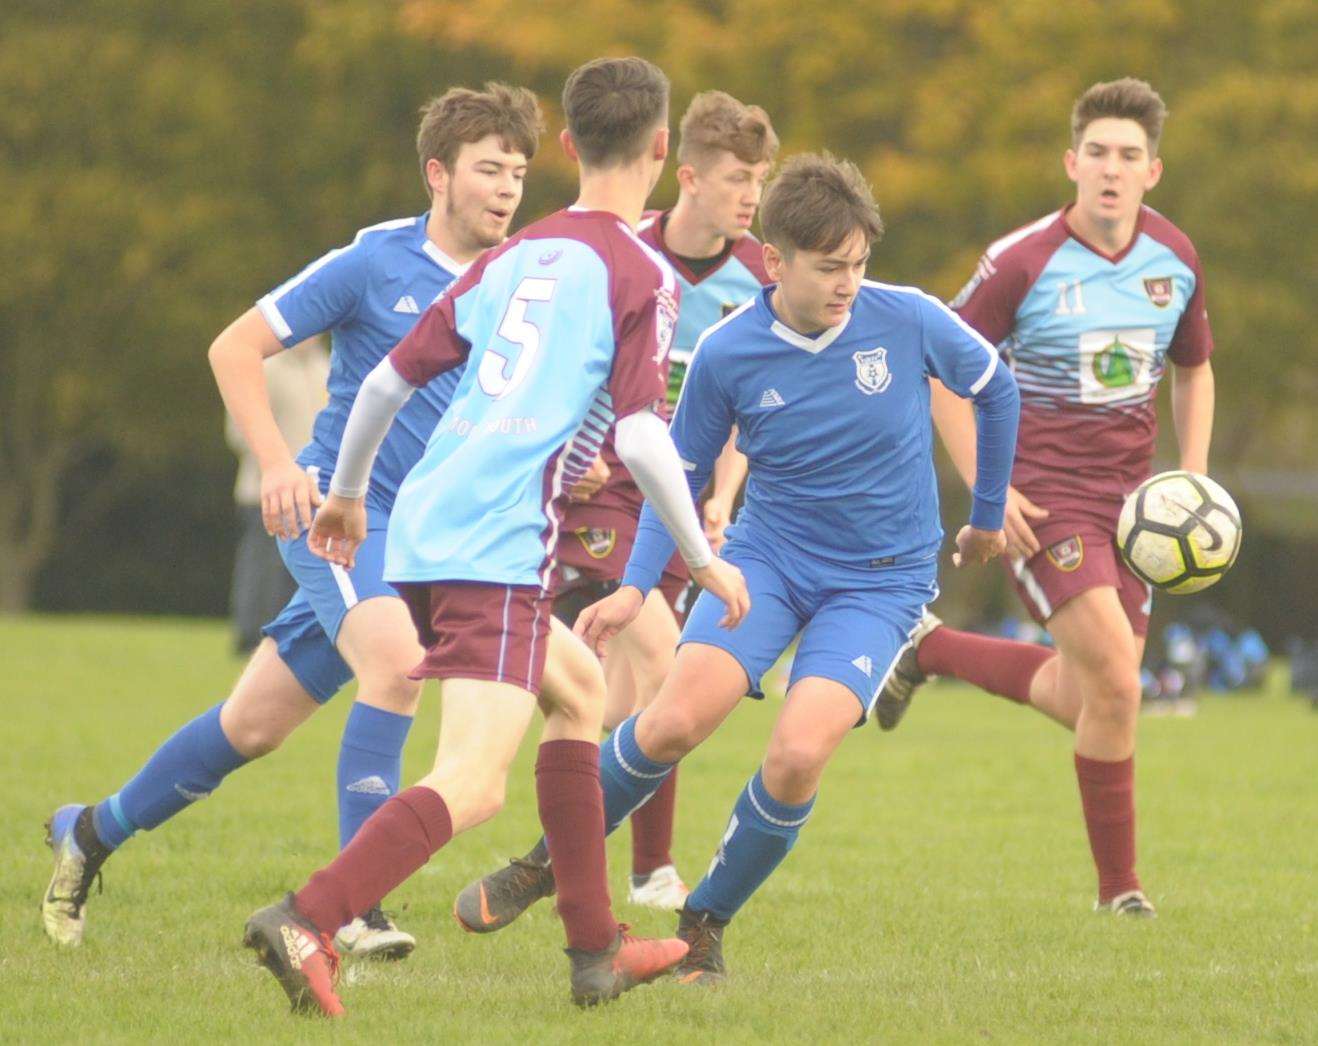 Wigmore Youth and New Road went head-to-head in Under-18 Division 2 Picture: Steve Crispe